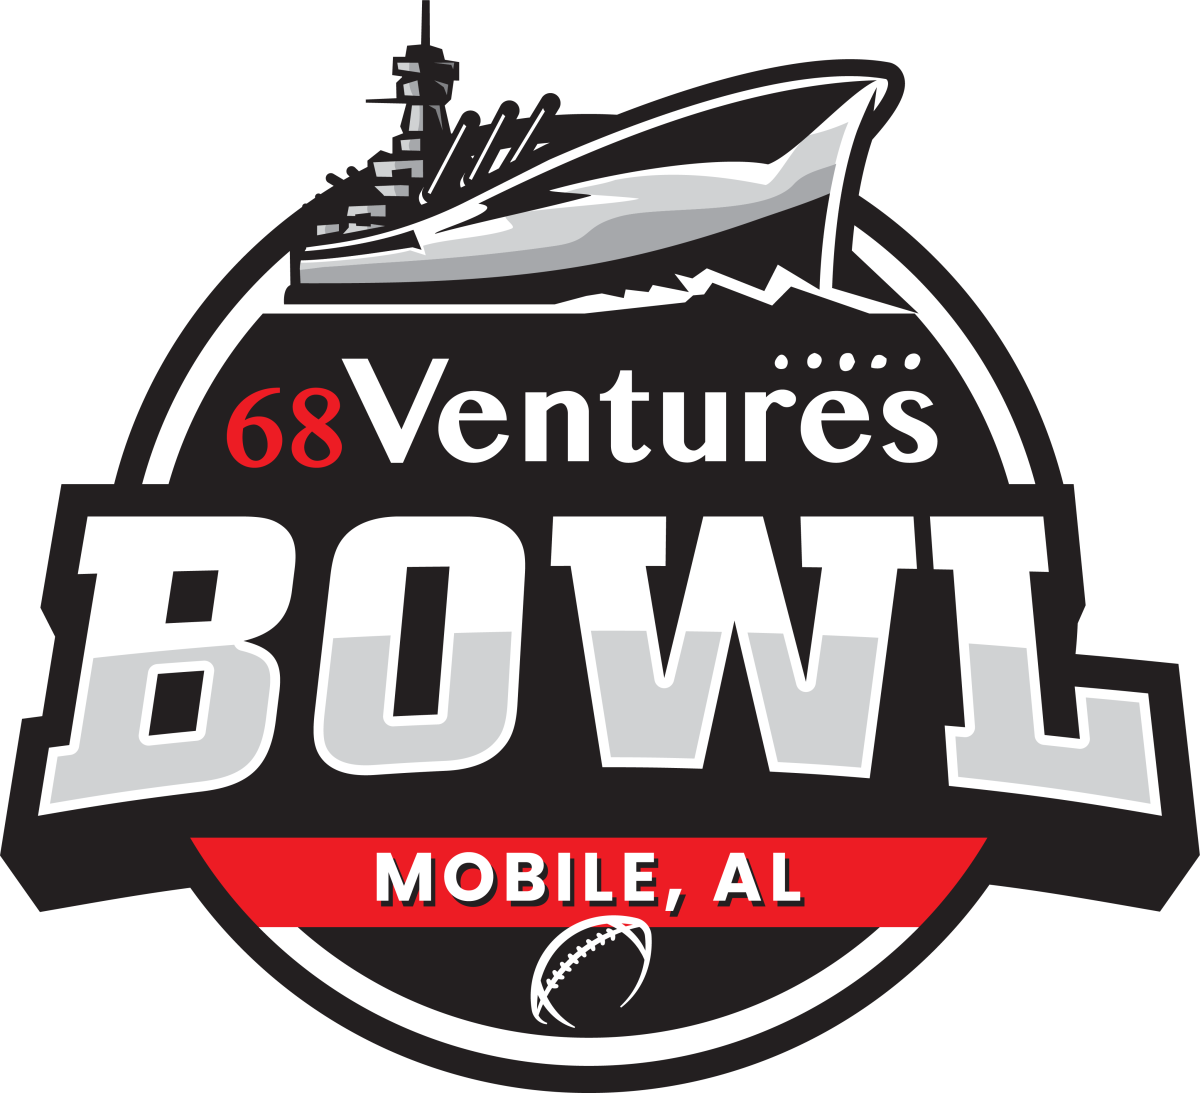 Eastern Michigan and South Alabama will face off in the 2023 68 Ventures Bowl in Mobile, AL on December 23rd at 7:00 PM ET.